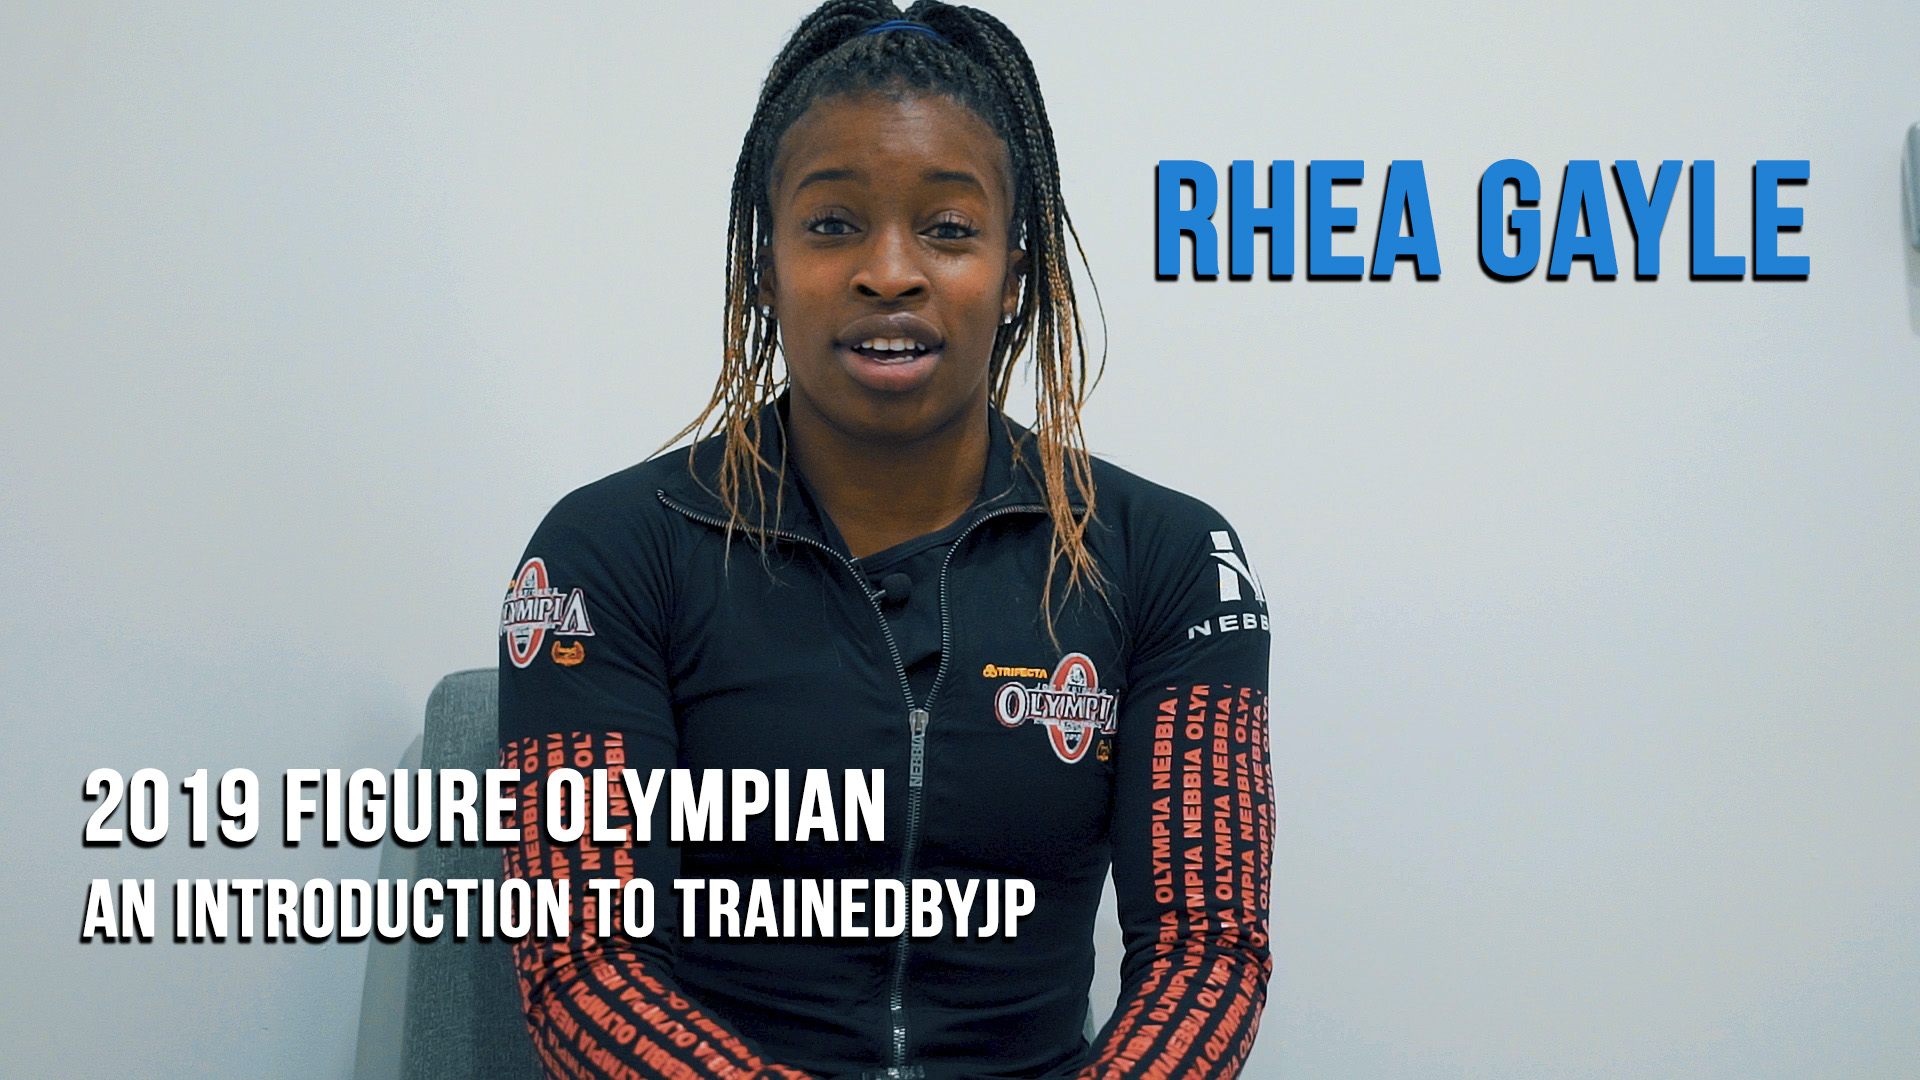 2019 Figure Olympian - Introduction to TrainedbyJP